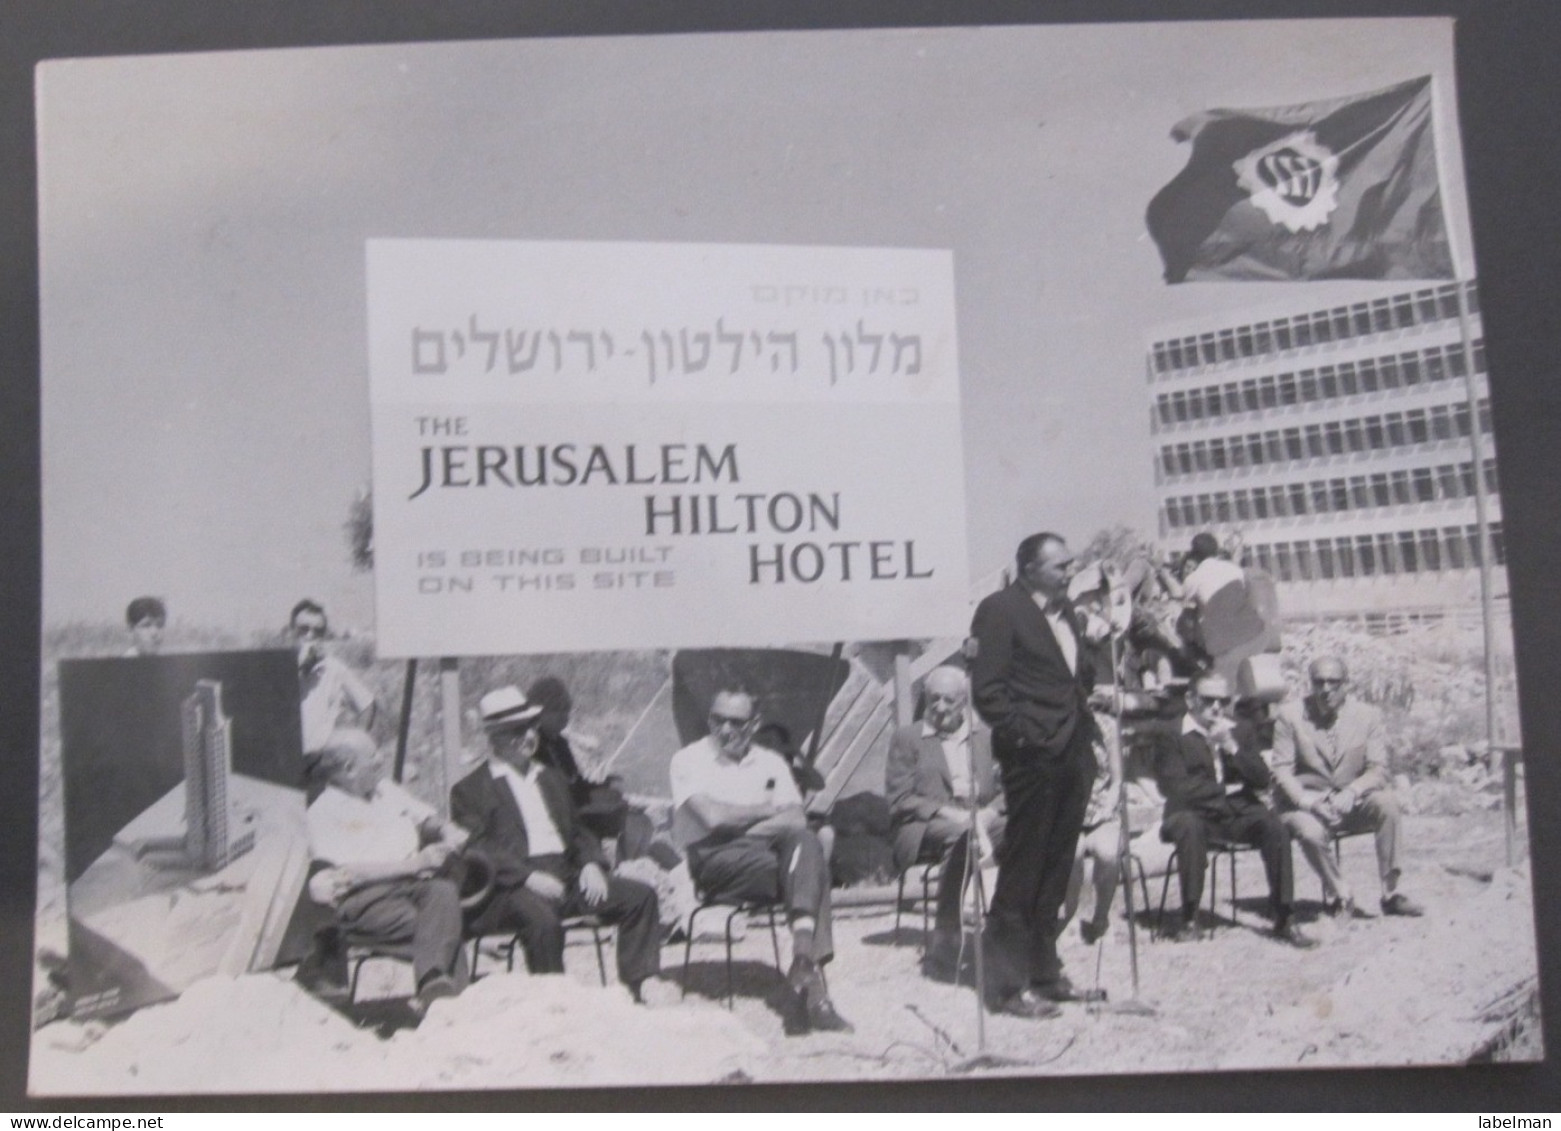 HOTEL HILTON JERUSALEM CORNER STONE CEREMONY ISRAEL CYRIL STEIN WORLD HOTELS 1970 REAL PHOTO TOURISM MIDDLE EAST - Unclassified